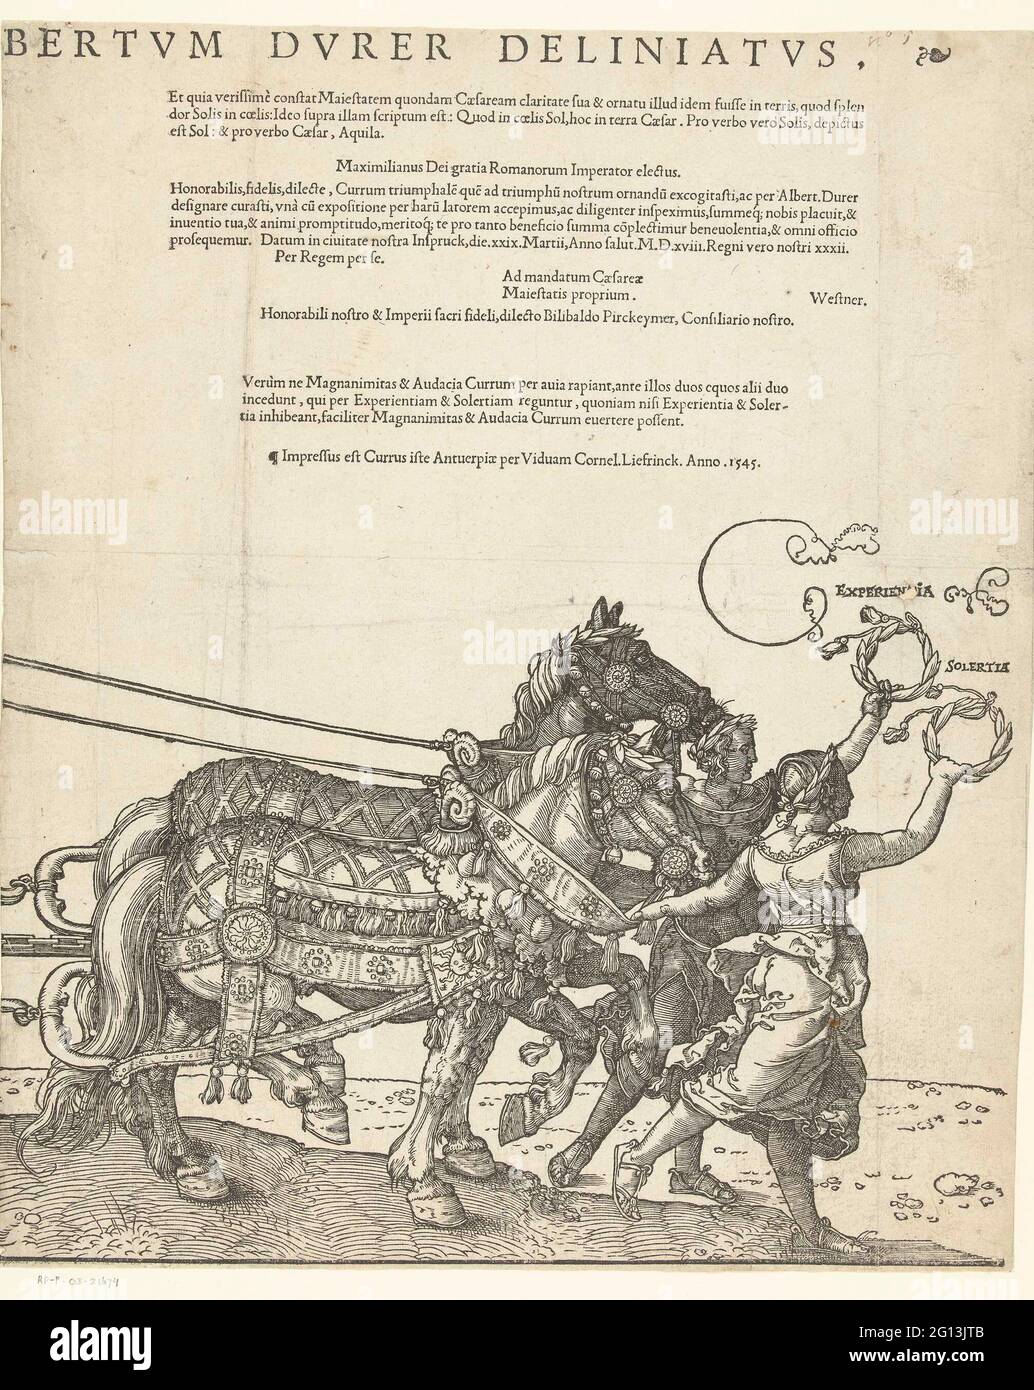 Triumphar from Emperor Maximilian I (eighth magazine), 1519; Copies to Dürers Triomfvag for Emperor Maximiliaan I, published in Antwerp in 1545 by the widow of Cornelis Liefrinck; Triumphalis His Currus Ad Honorem Invictiss. AC Gloriosiss. Principis D. Maximiliani Caesis Semper Augusti (...) per Albertum Durer Delineatus. The large triomfvag in honor of Emperor Maximiliaan I at his death on January 12, 1519. Eighth magazine with the sixth span horses with experientia and Soprano. Copy to the original of Albrecht Dürer from 1522. Stock Photo